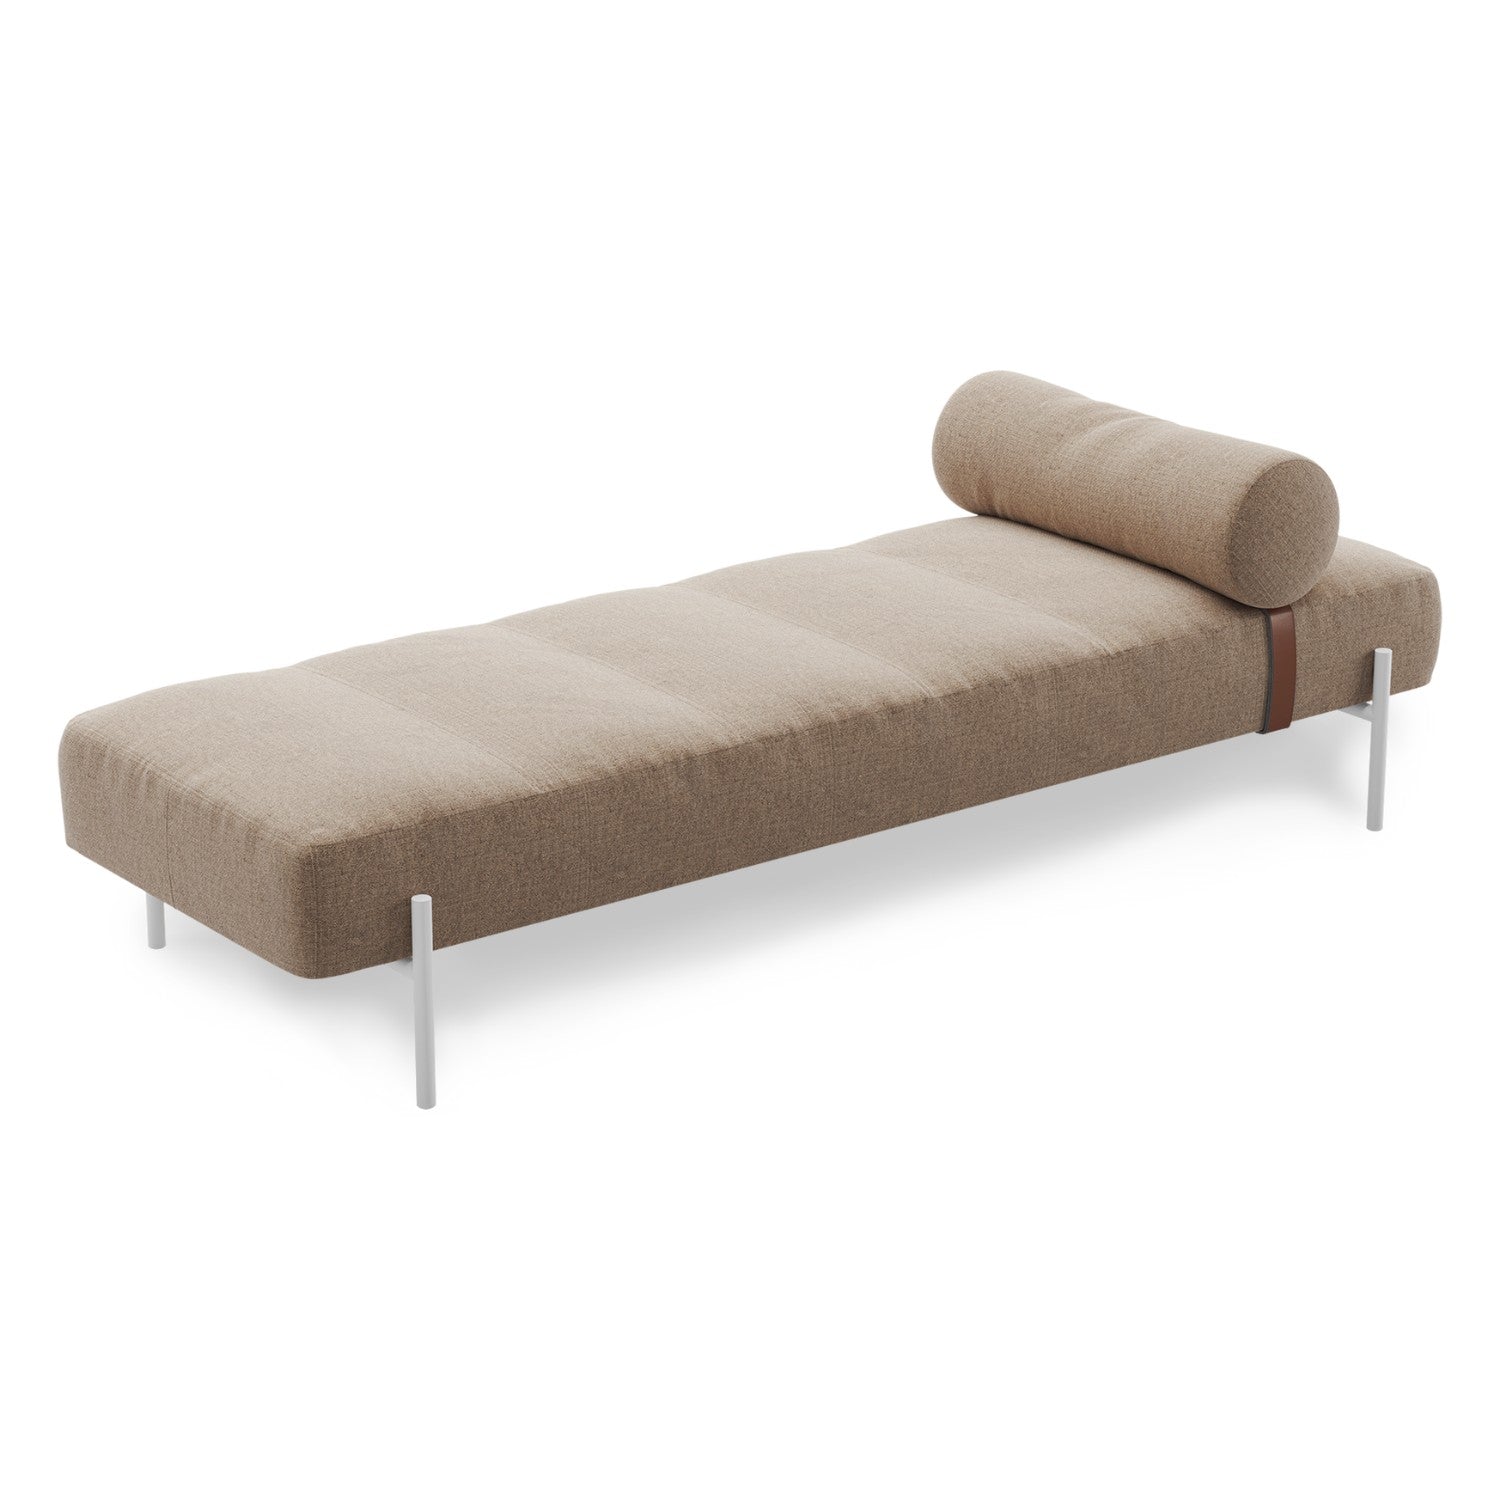 DAYBE - Daybed